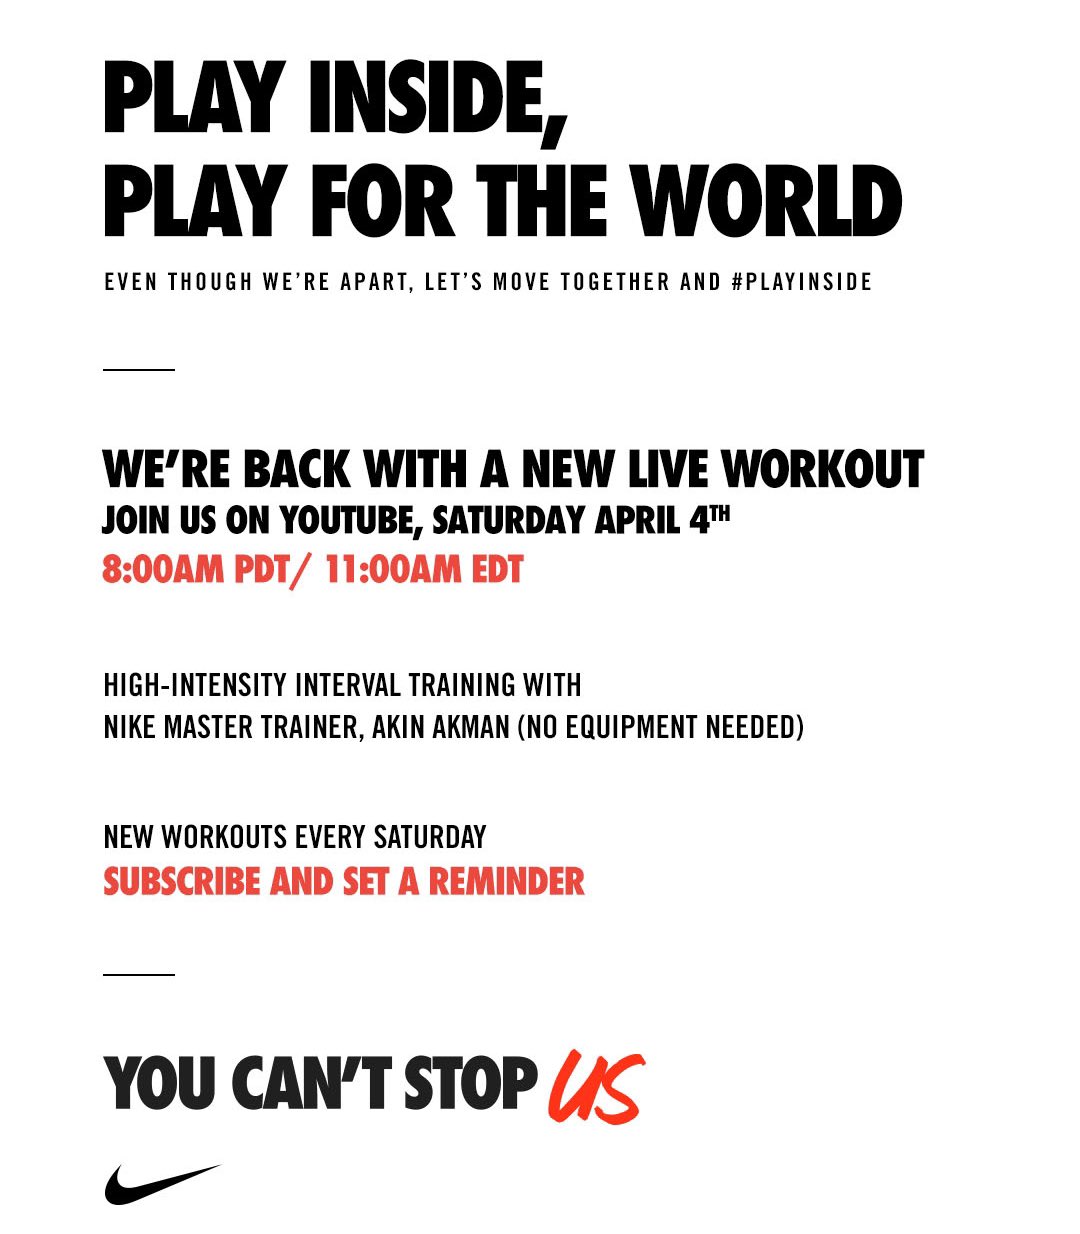 Basketball on Twitter: "We saved you a spot. Join us for a live NTC workout on led by Nike Master Trainer, @akin87. Jump in: https://t.co/4k6FzAYInK #playfortheworld https://t.co/xWXGtJvKQD" / Twitter